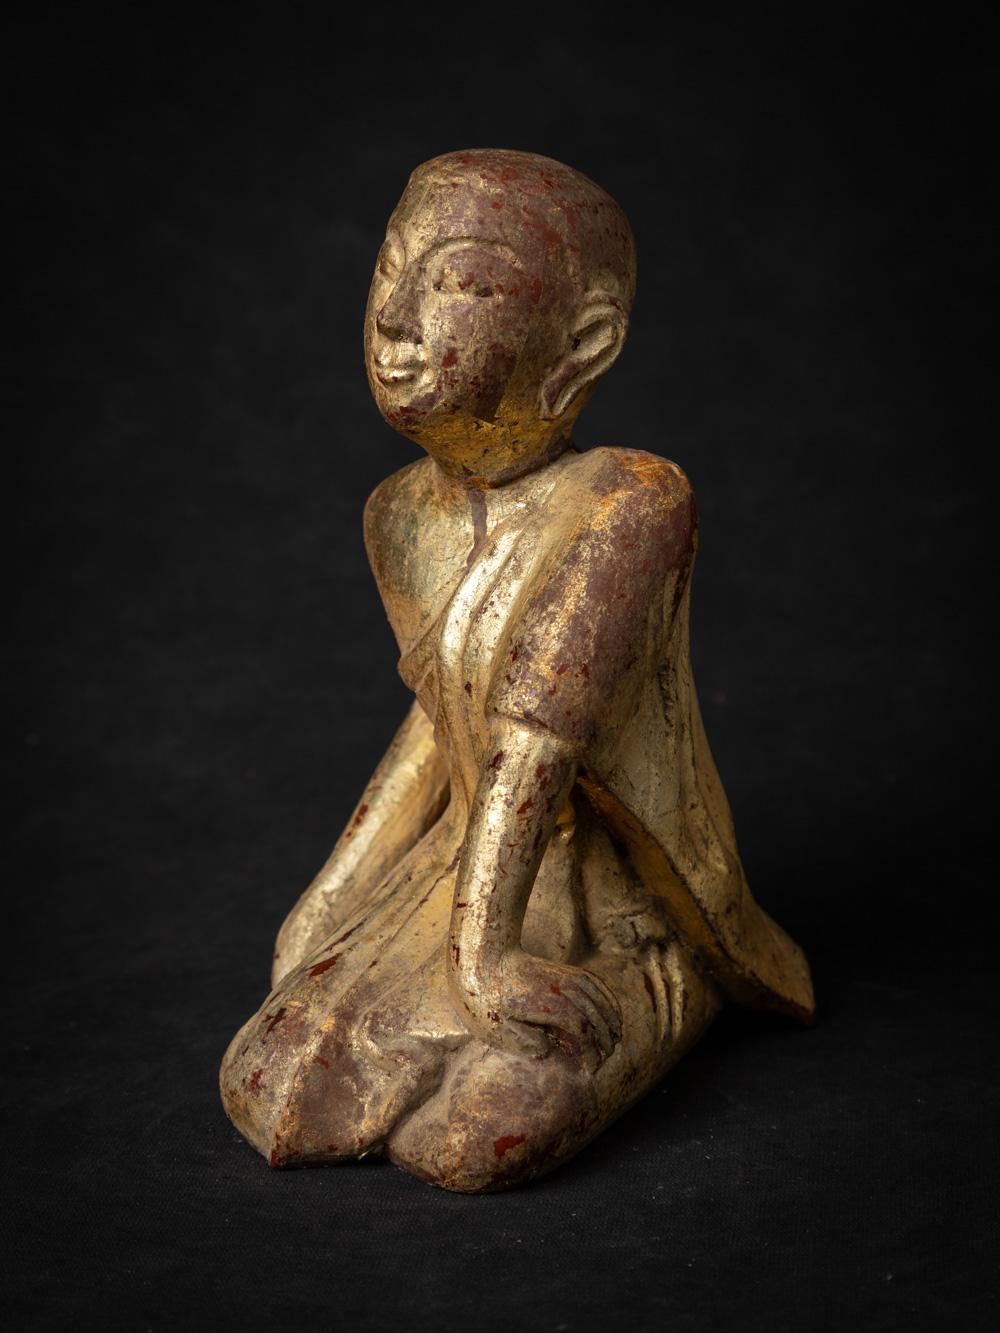 This old wooden Burmese Monk statue is a testament to the artistic traditions and spiritual heritage of Burma (now Myanmar). Crafted from wood, this statue stands at a height of 18.5 cm with dimensions of 9.8 cm in width and 13.7 cm in depth. Dating